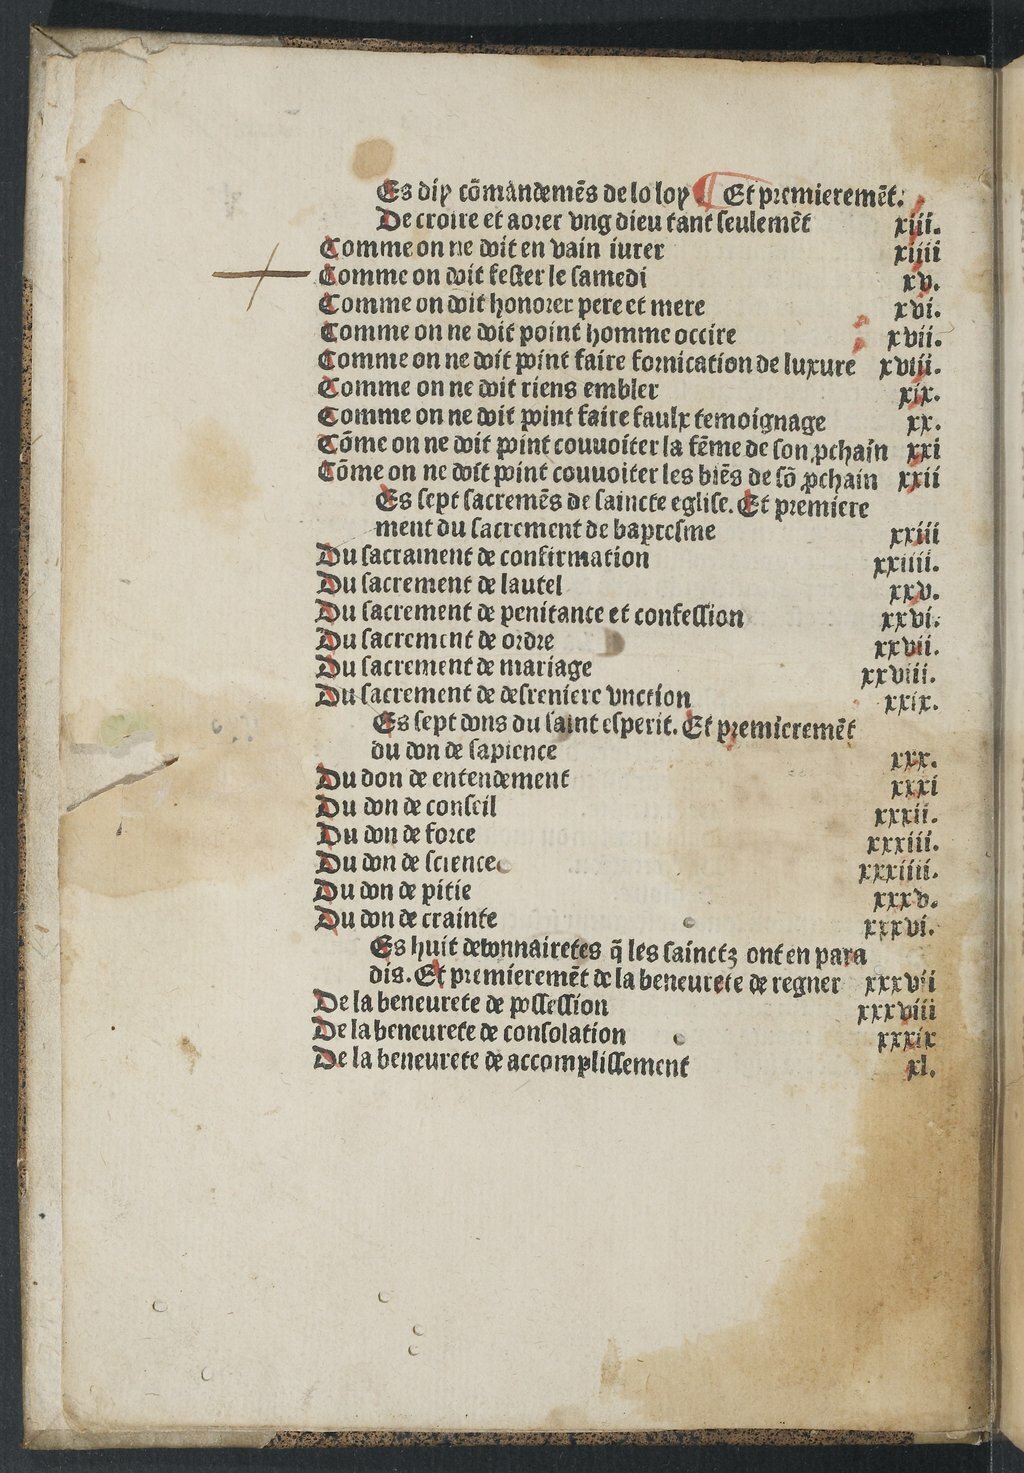 1482 [Antoine Caillaut] Trésor des humains BnF_Page_002.jpg